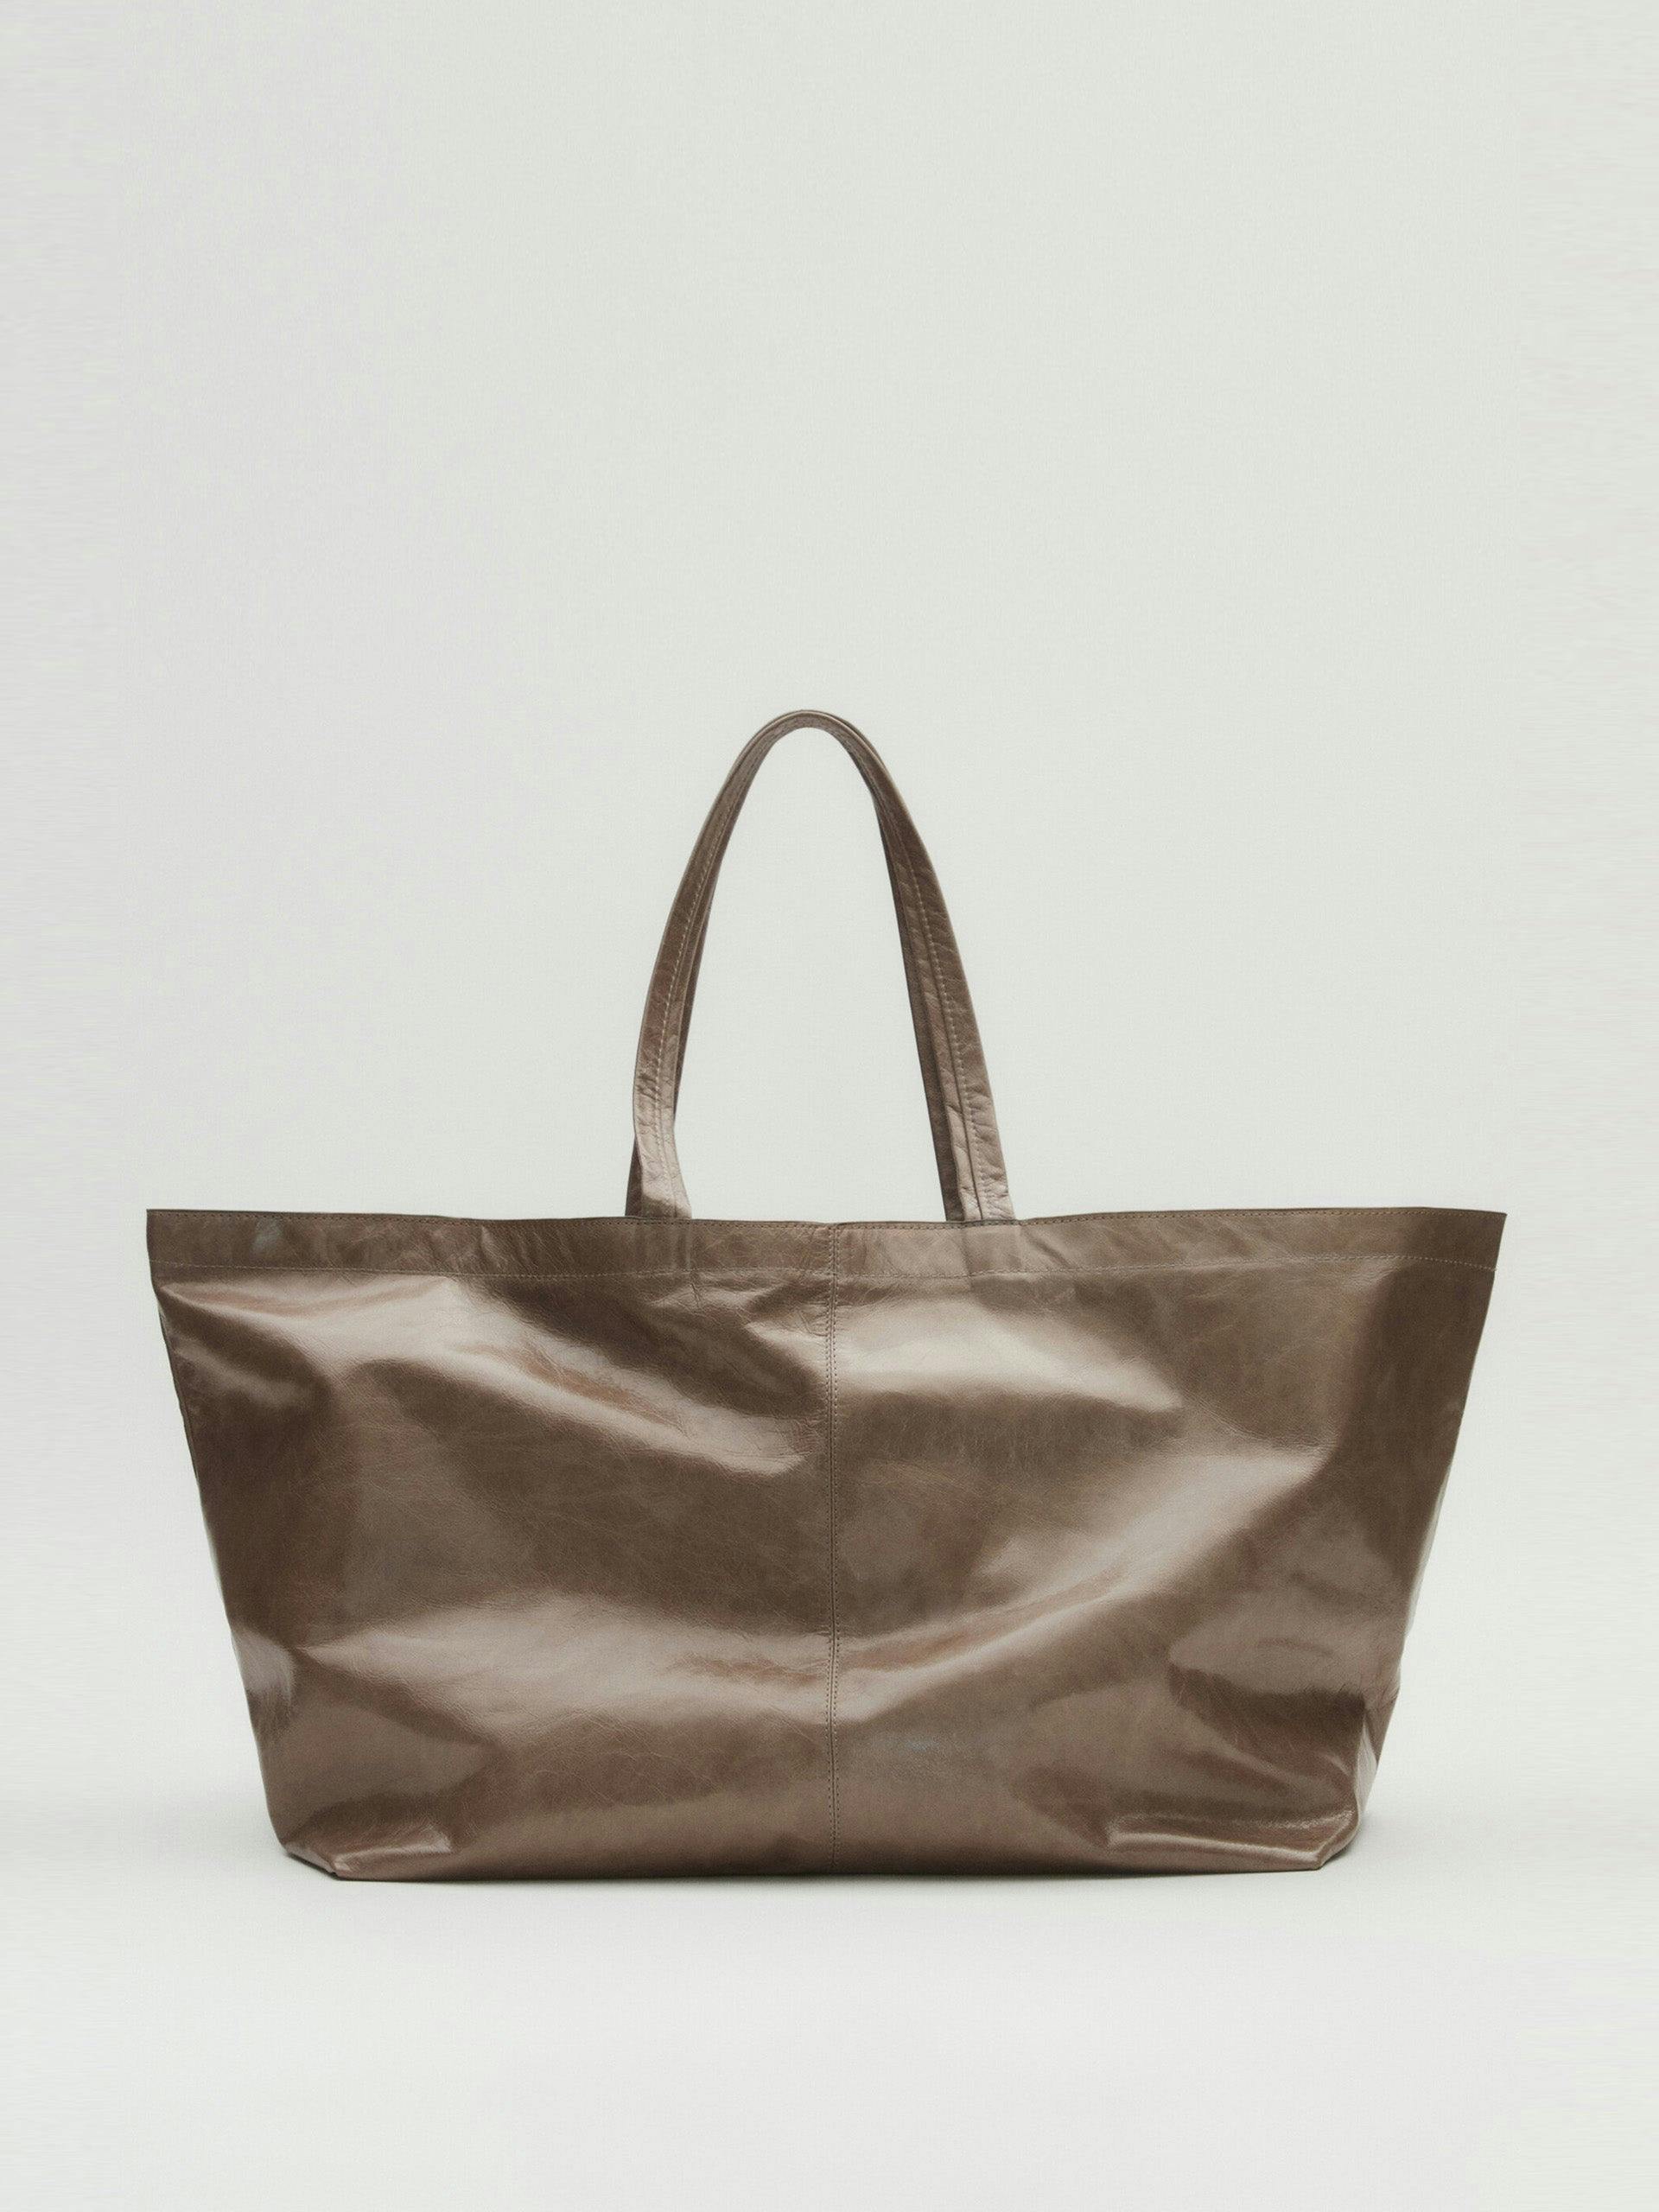 Maxi crackled leather tote bag